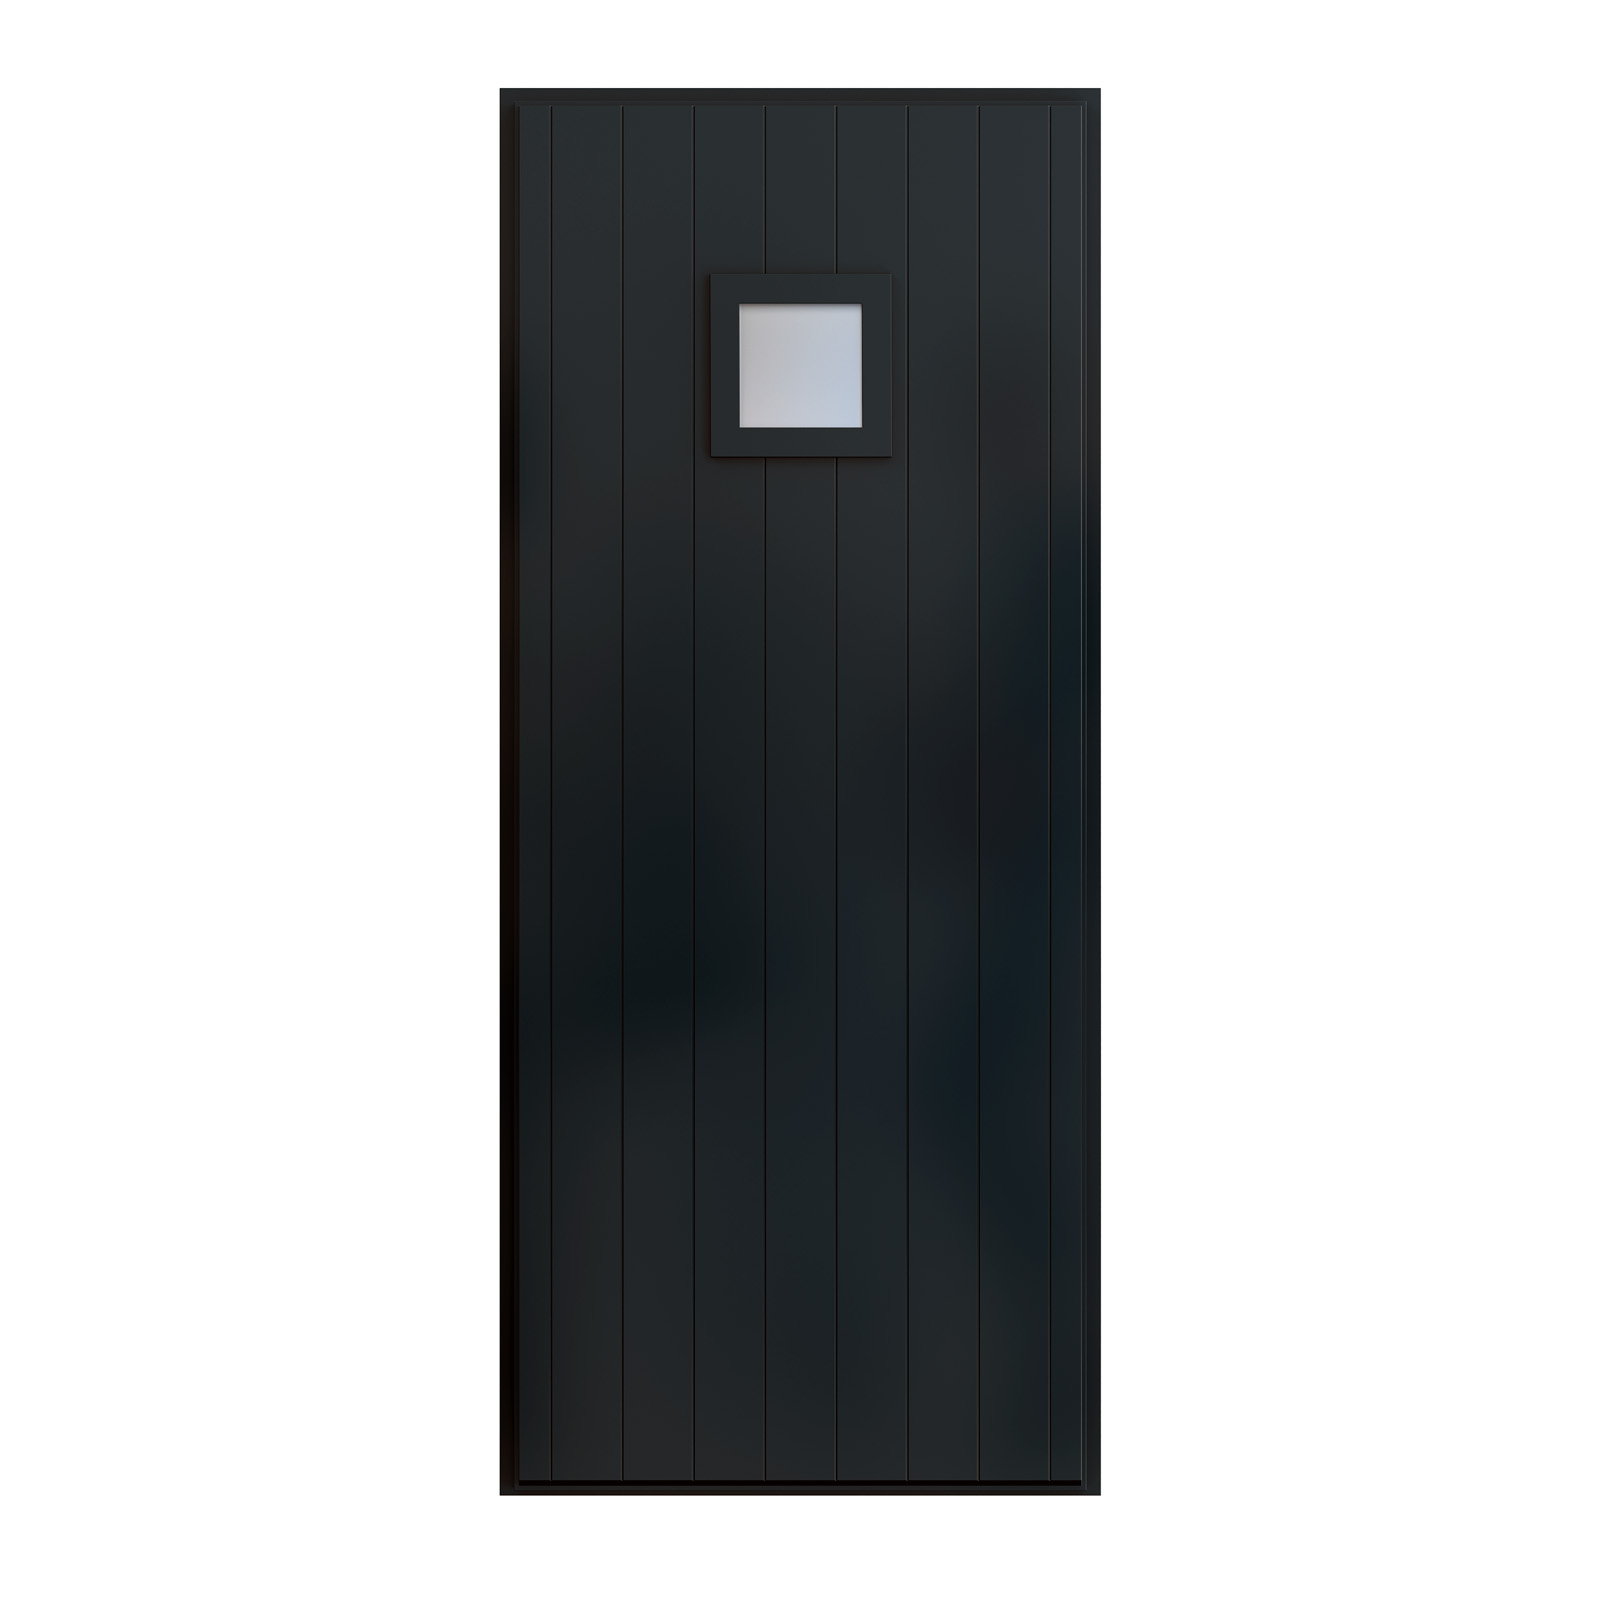 Alitherm 400 Door with PT0003P panel